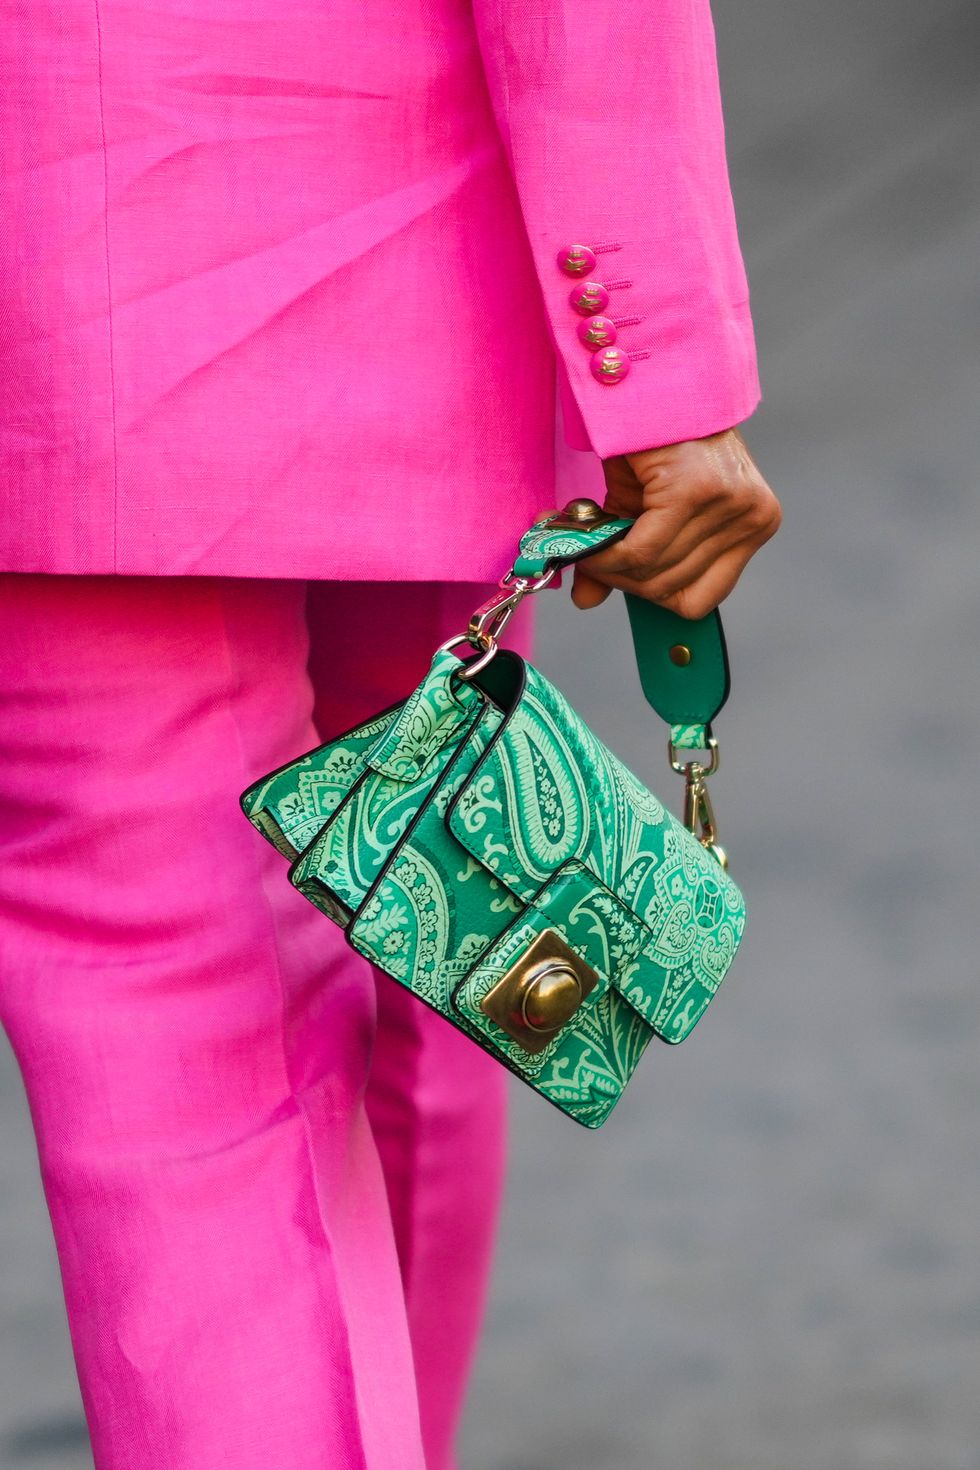 milan, italy january 16 tamu mcpherson wears a bold pink oversized blazer jacket, matching flared suit pants, a green leather bag, outside the etro fashion show during the milan mens fashion week fallwinter 20222023 on january 16, 2022 in milan, italy photo by edward berthelotgetty images